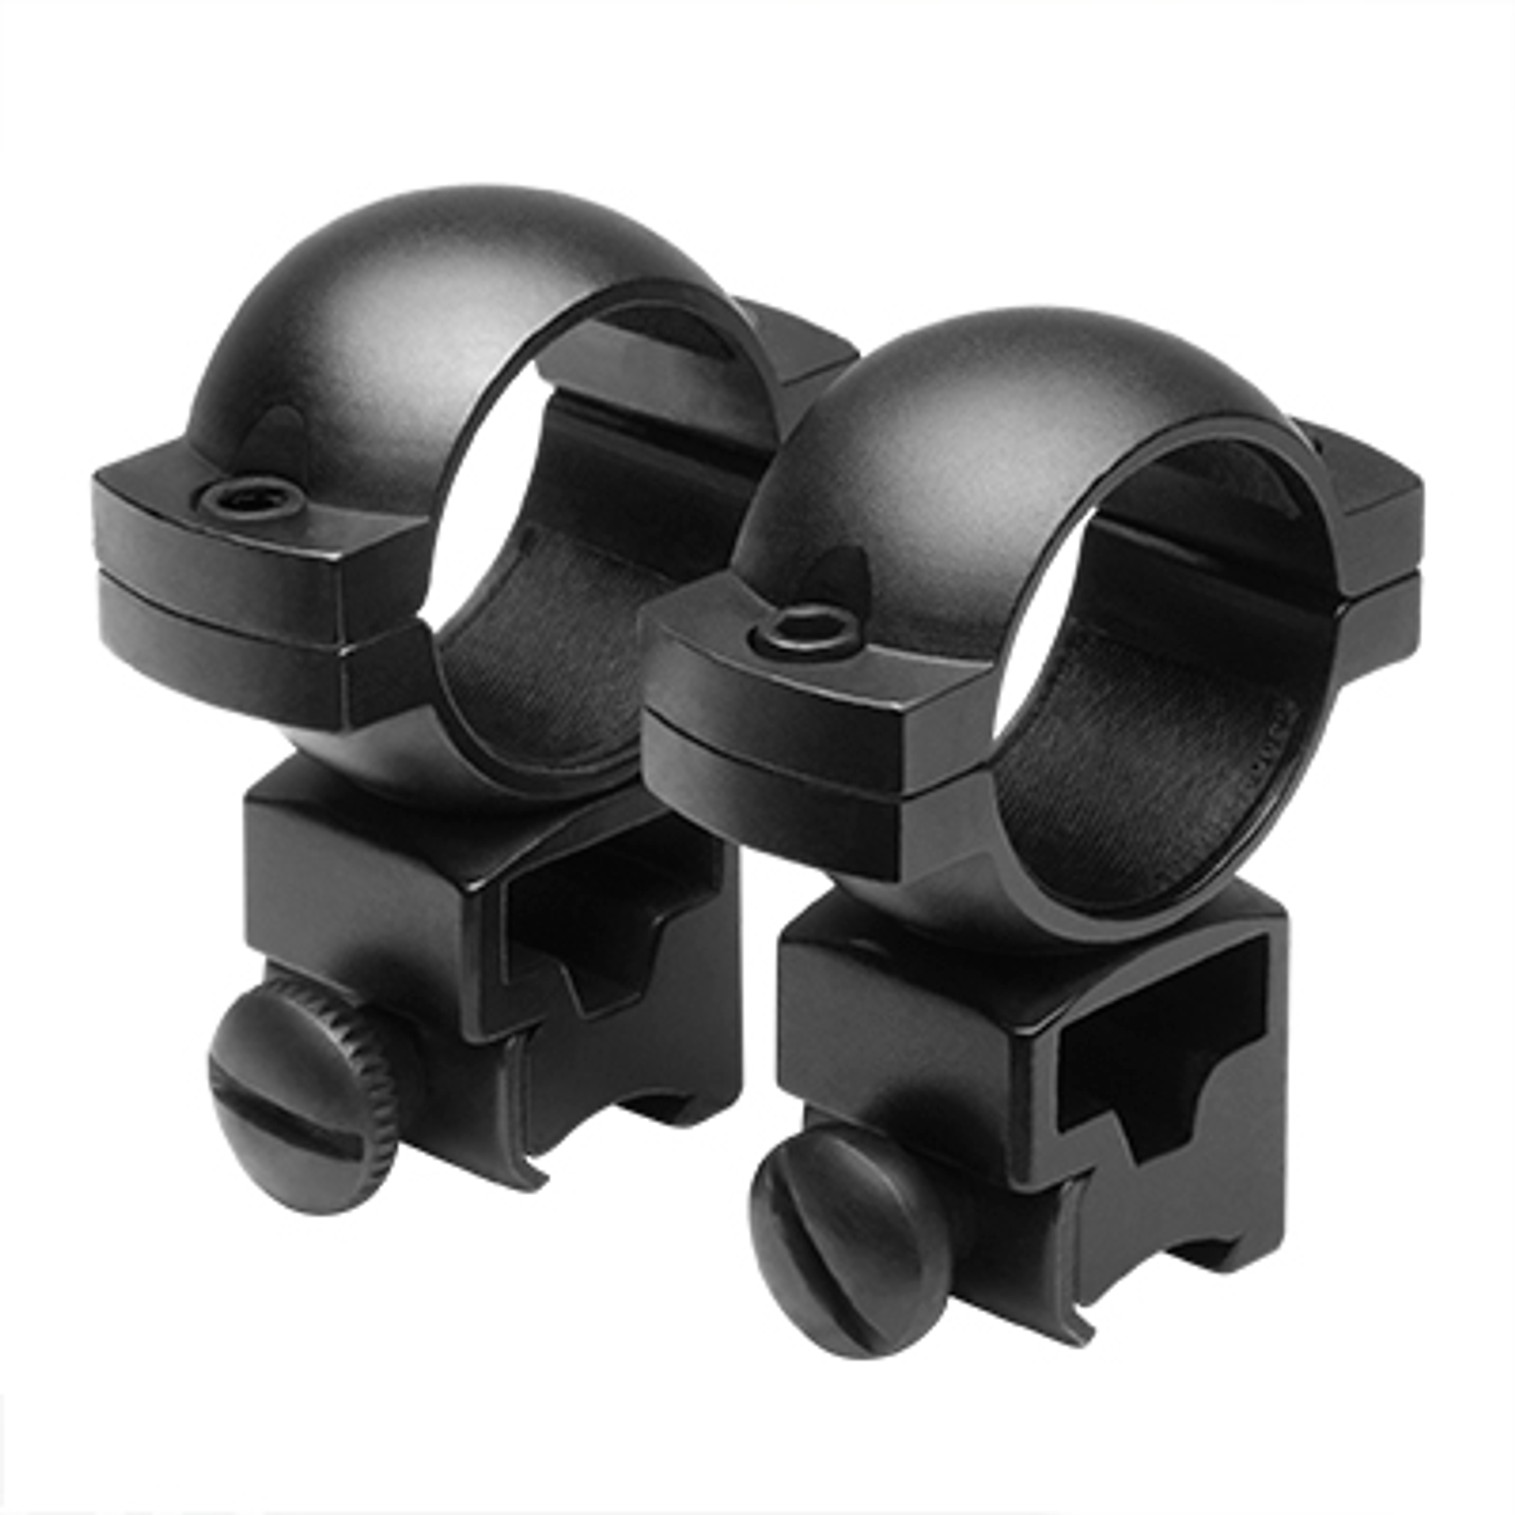 NCStar RB19 Ring Mount